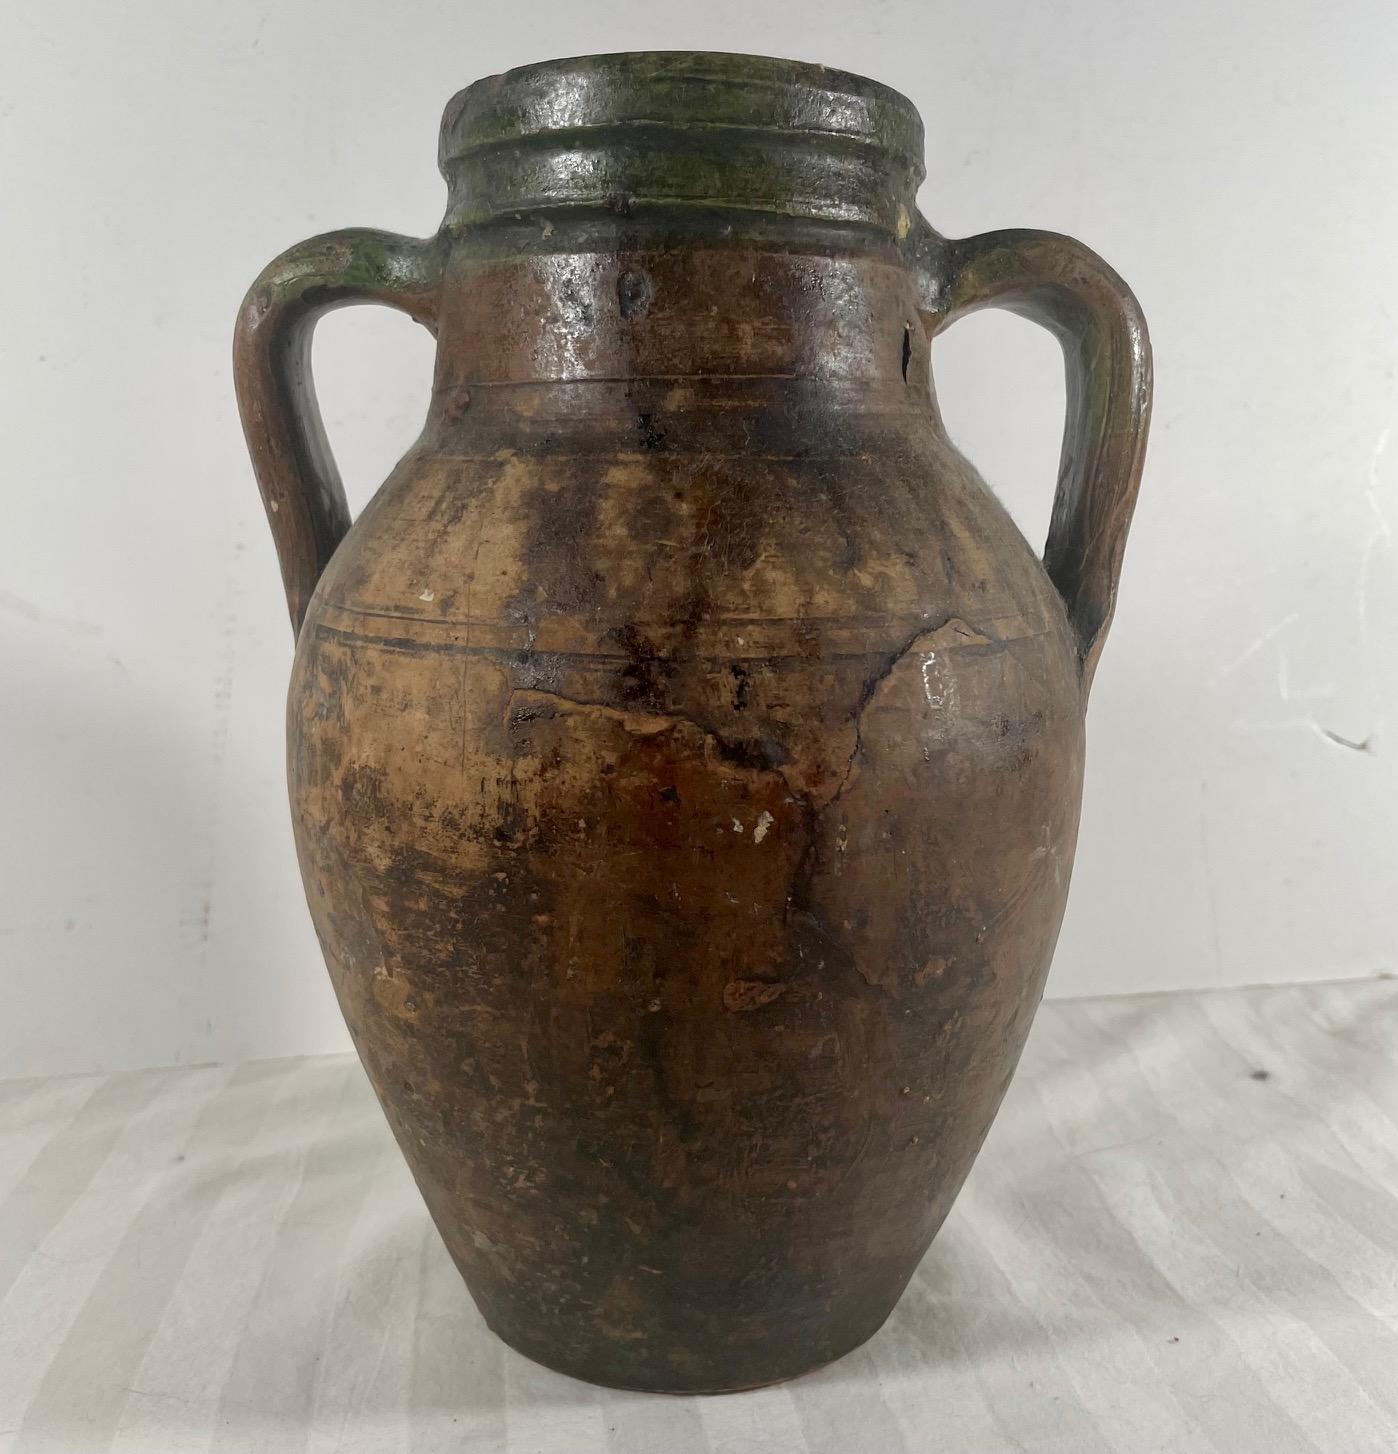 Antique Terracotta Amphora olive oil pot. 

This European terracotta amphora was probably used for the storage and transport of olive oil. The double handled jug is green painted around the mouth and shows a beautiful natural patination of use